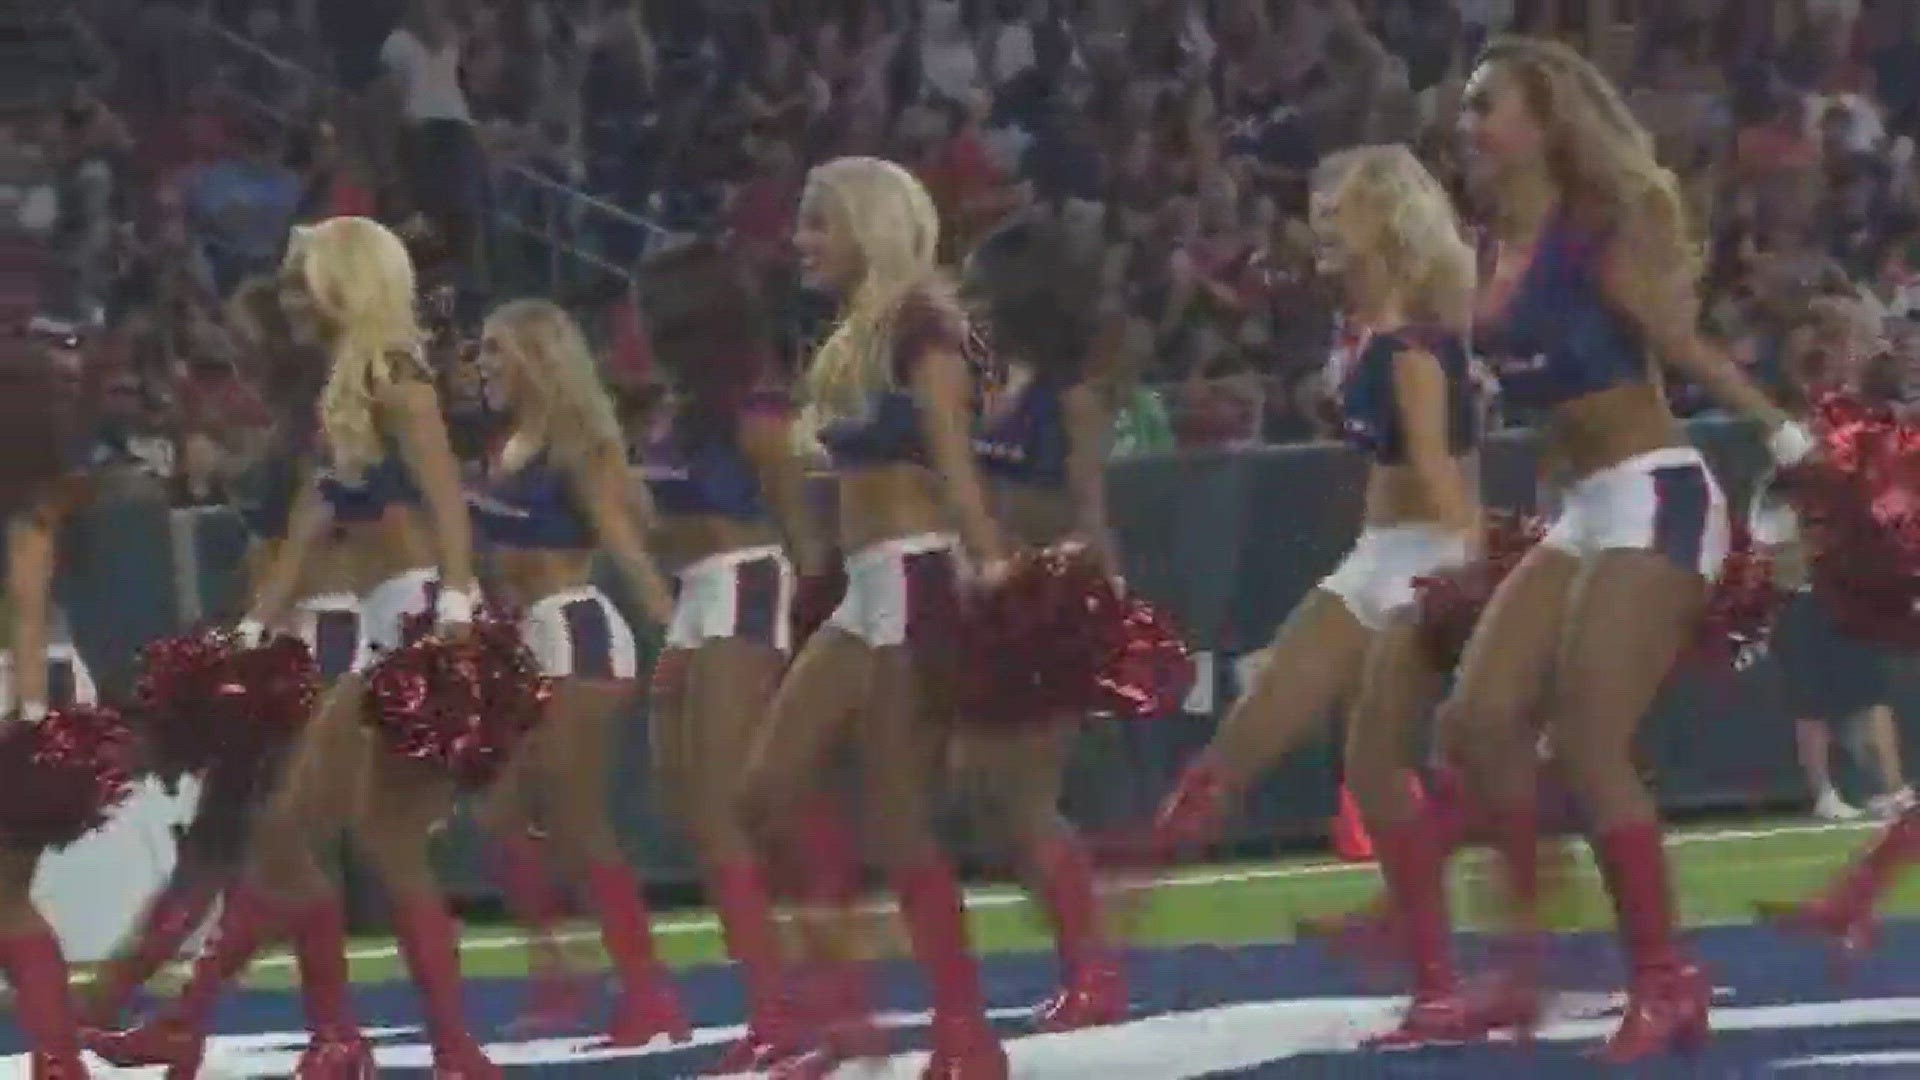 The Houston Texans Cheerleaders perform during the preseason game against the New Orleans Saints.